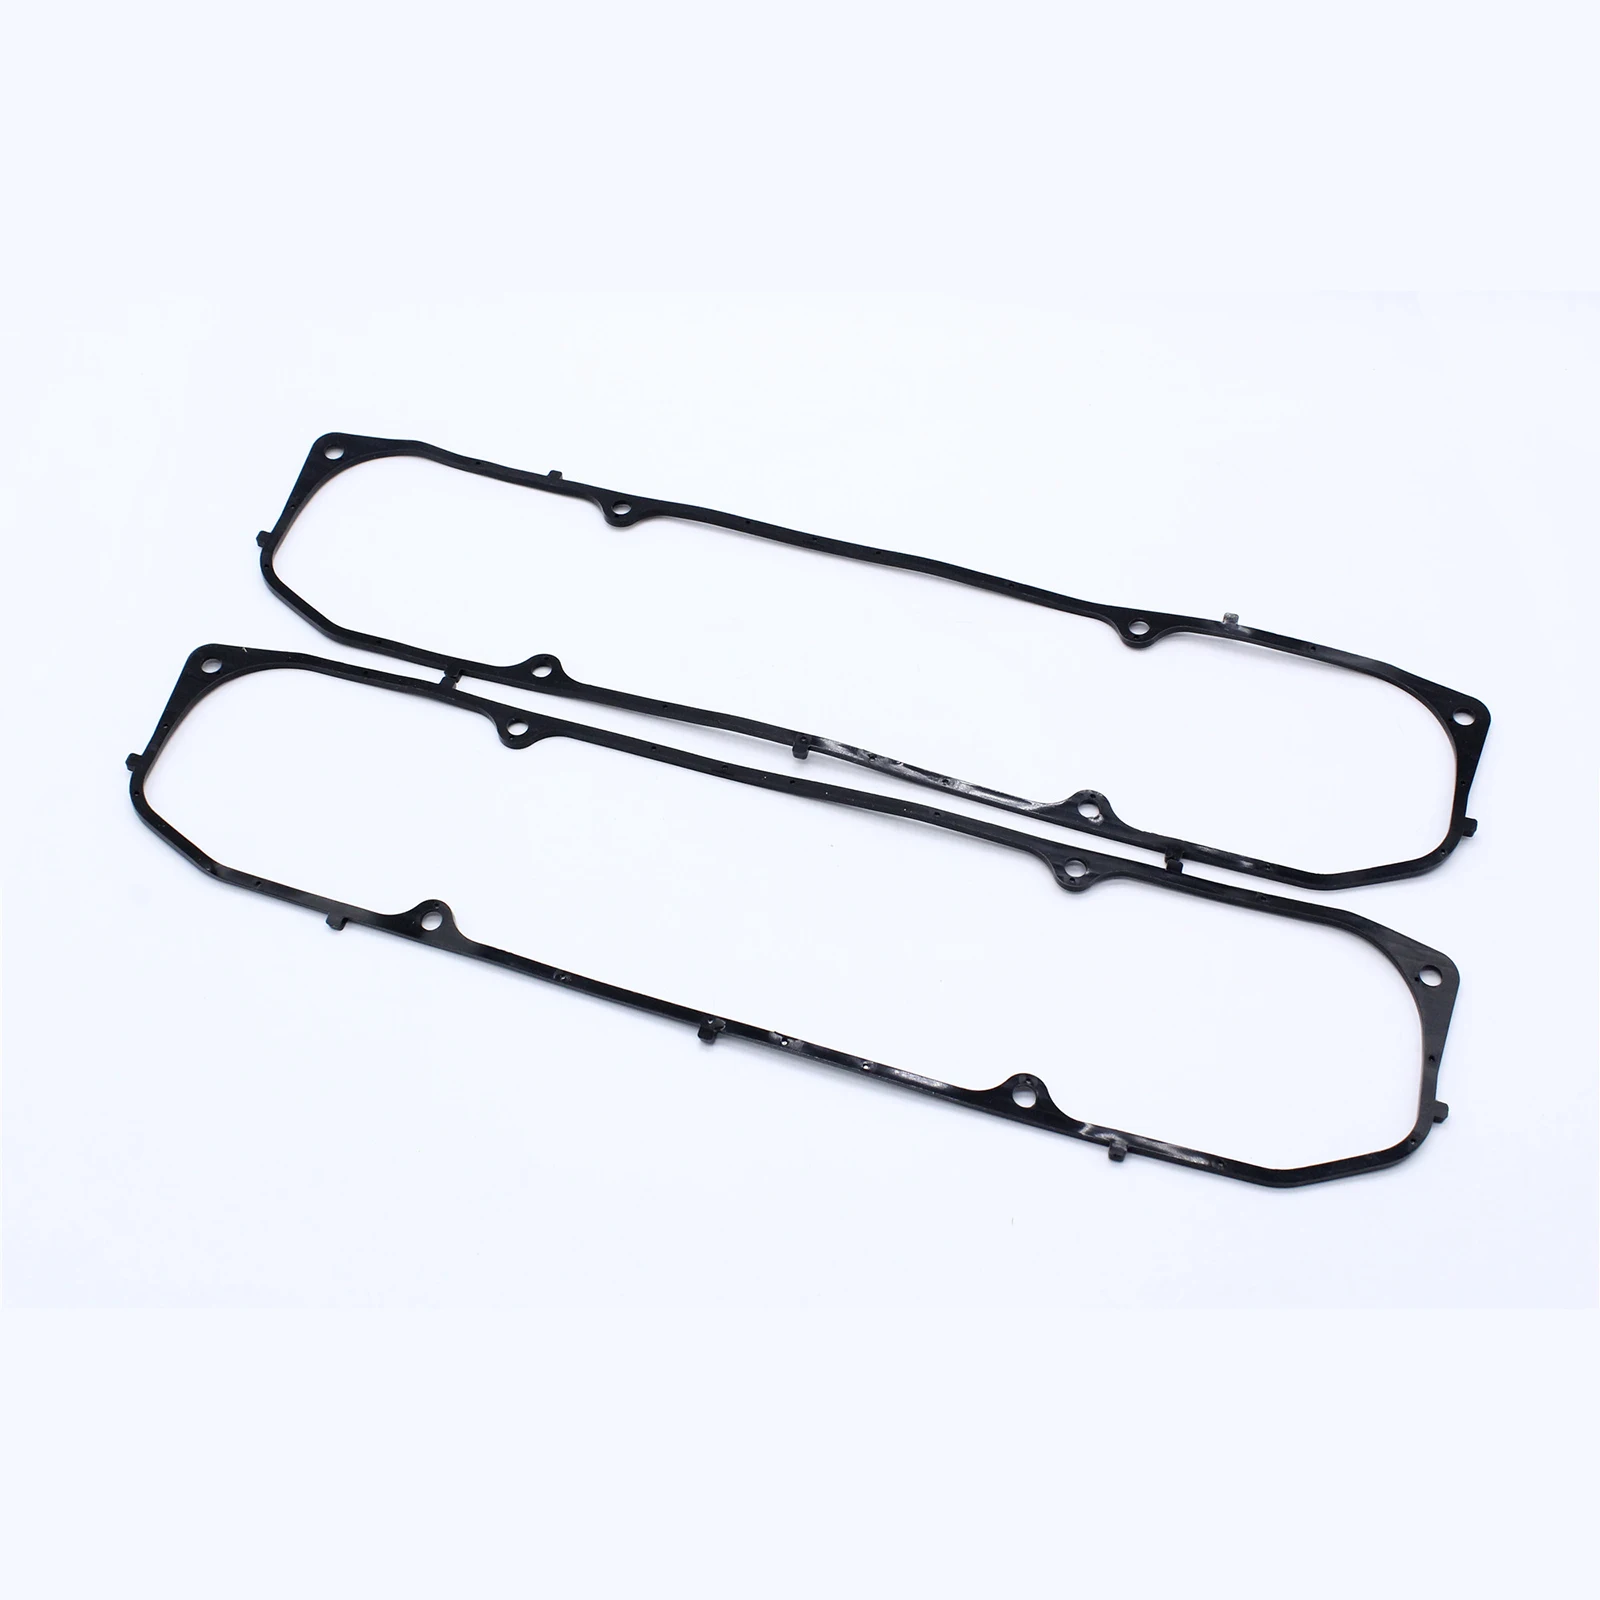 Steel Core Valve Cover Gaskets Rubber 383 400 440 Car Accessories Replacement 3/16`` Thick Big Block for Mopar